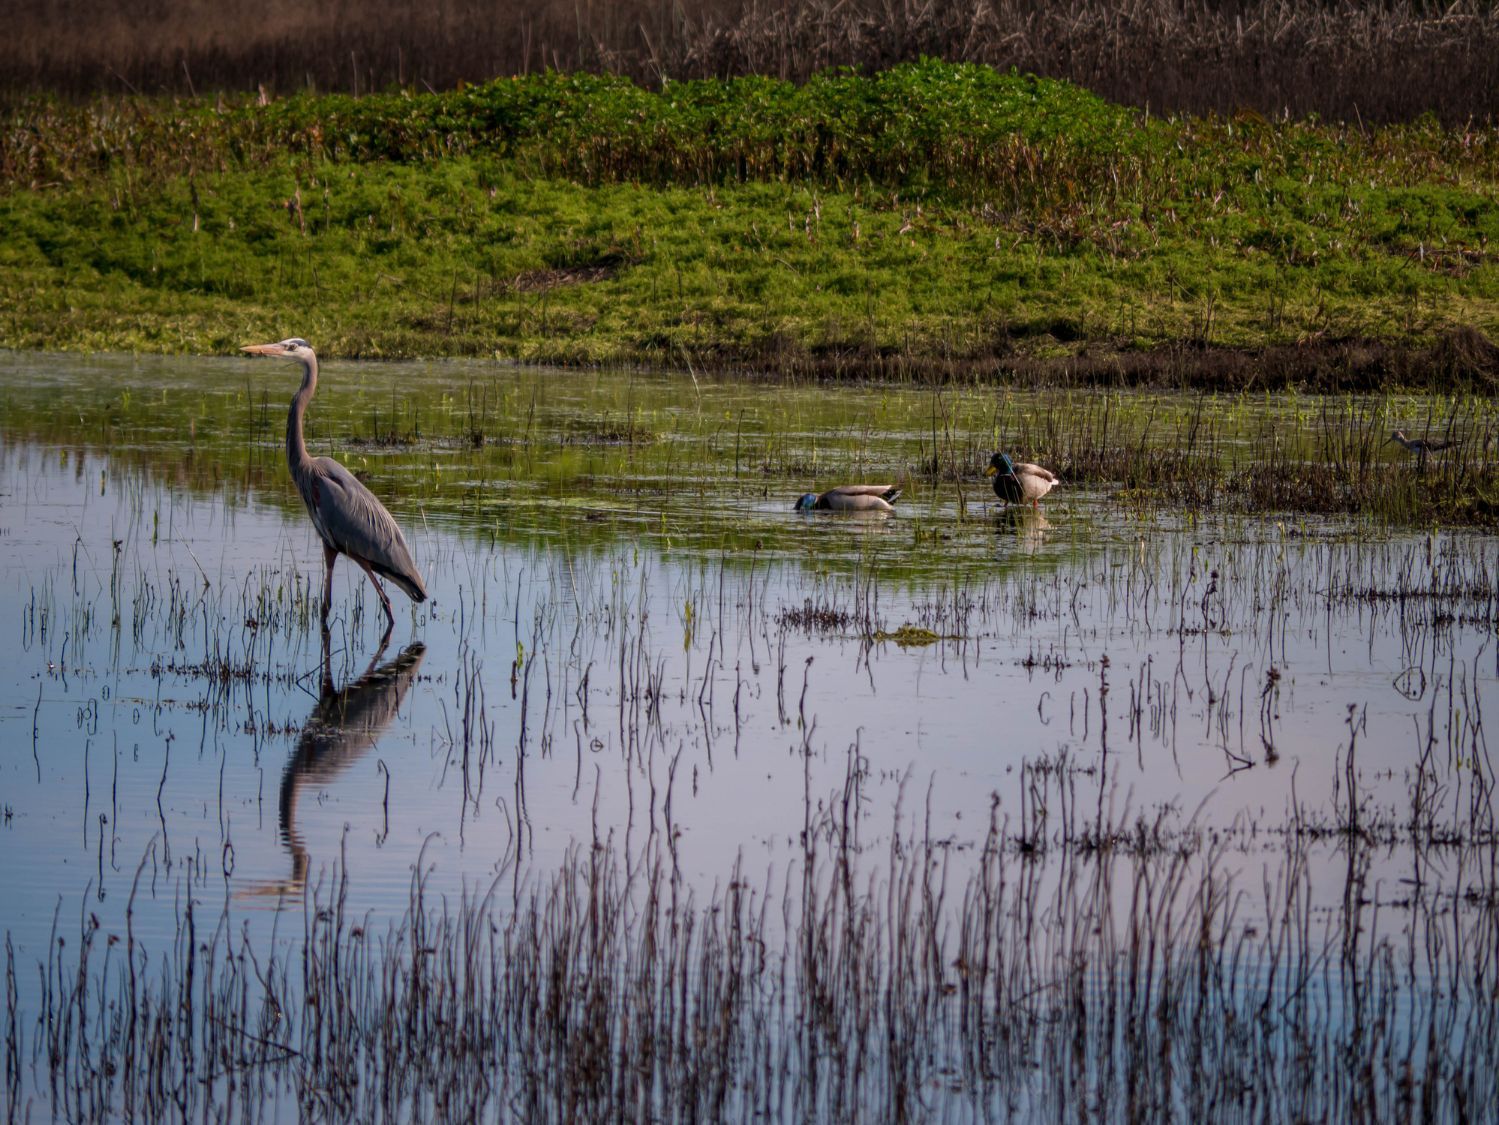 Wetlands provide homes for a wide range of biodiversity, from amphibians to large birds. Photo: Getty